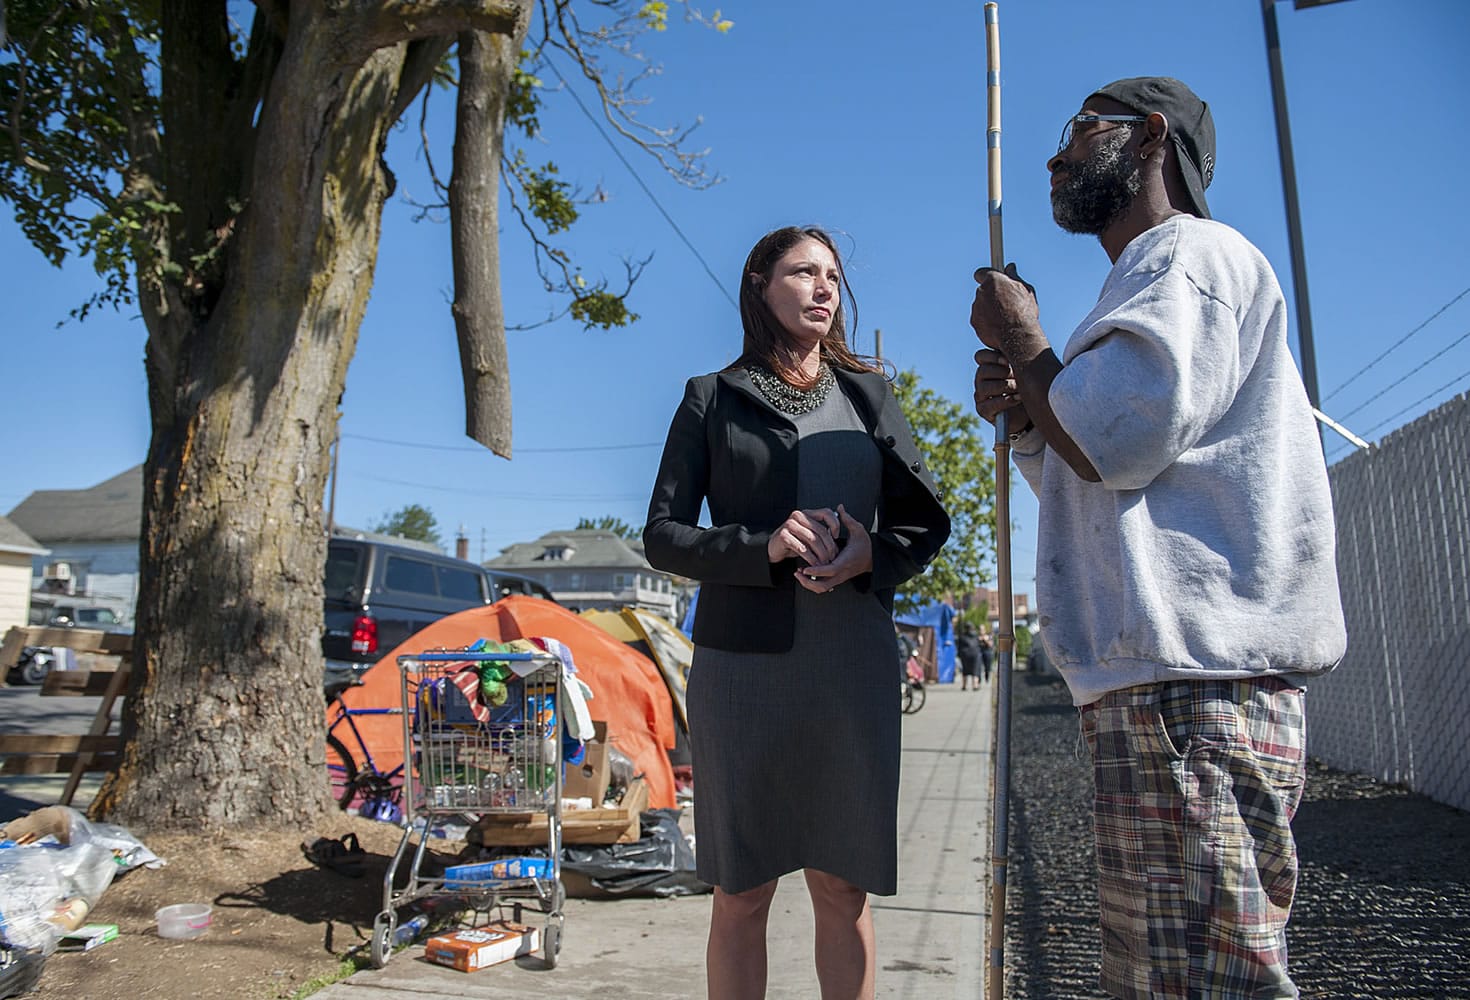 Vancouver City Councilor Alishia Topper talks recently with Calvin Chastang, who camps in downtown Vancouver. The community rallied early this year to rescue families at Courtyard Village Apartments from homelessness; now, more homeless people have been appearing on the streets of West Vancouver.